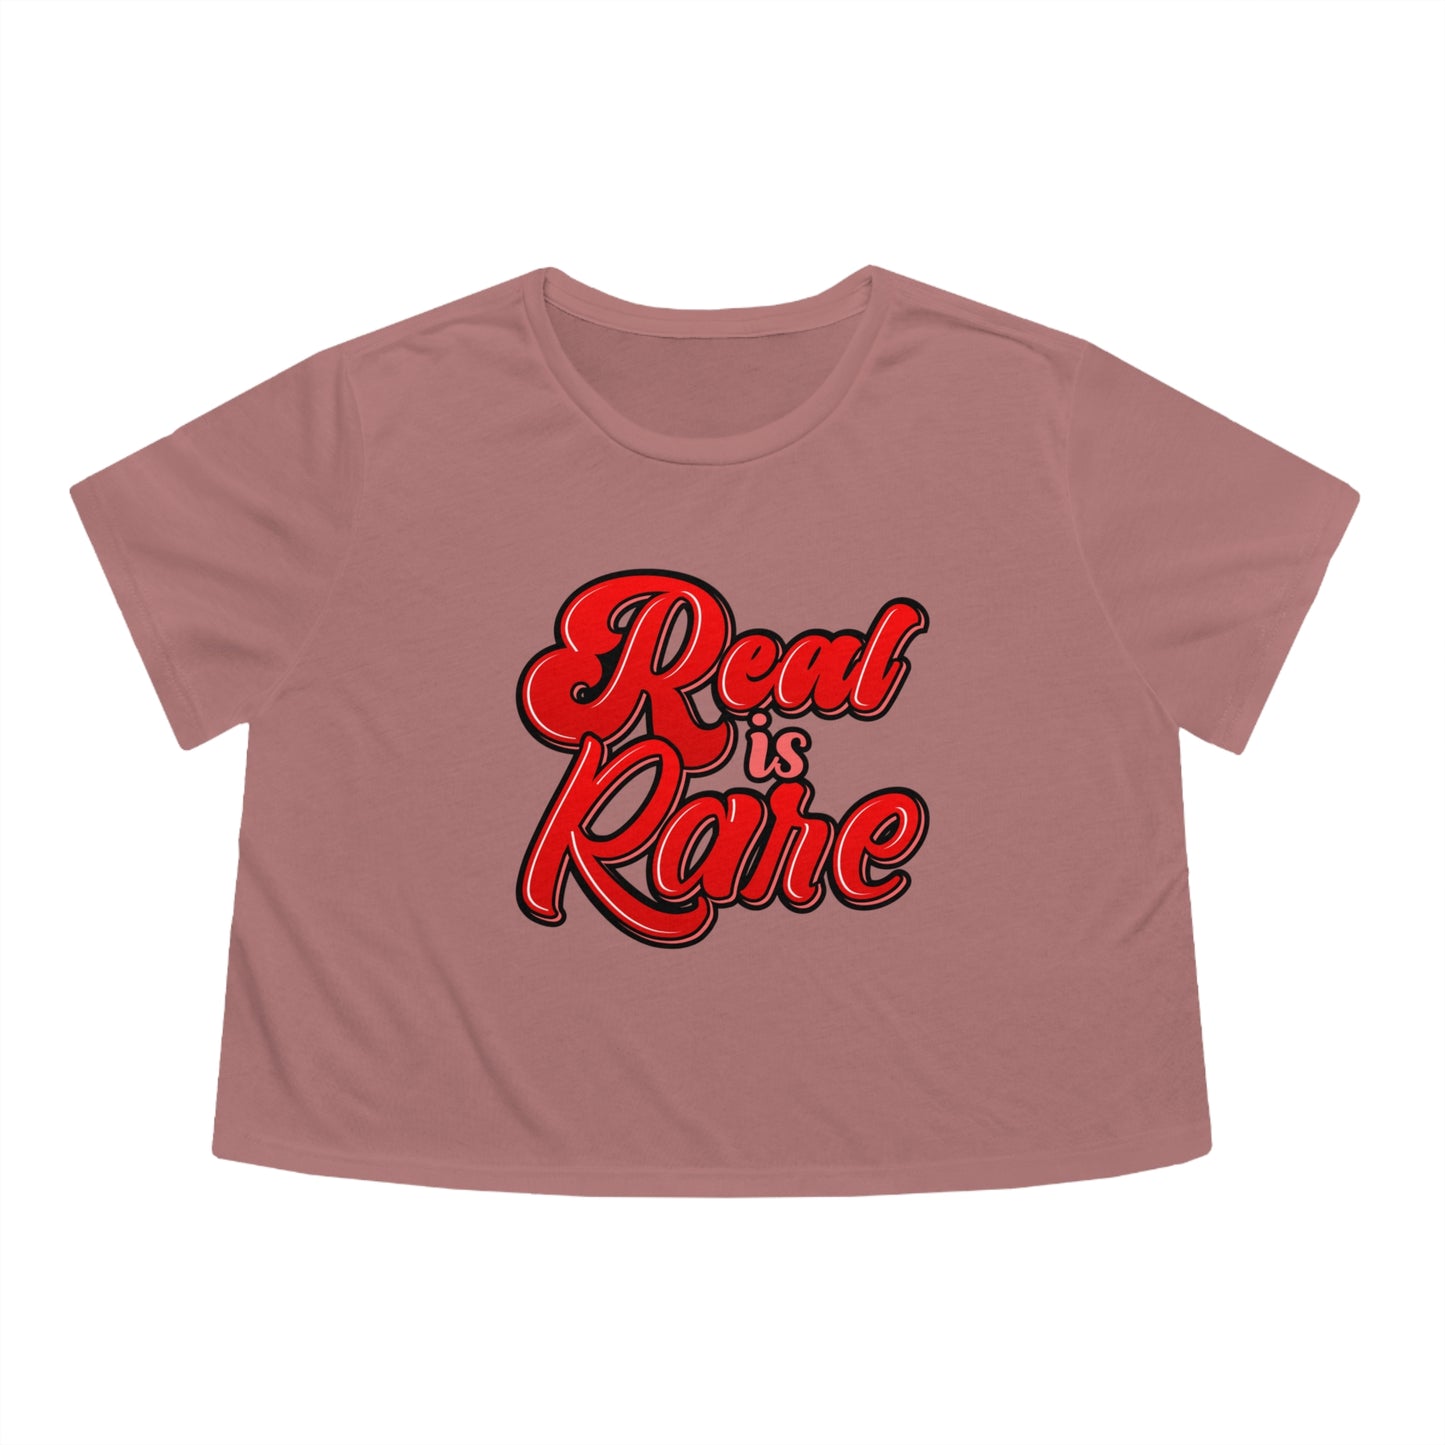 Real is rare crop top